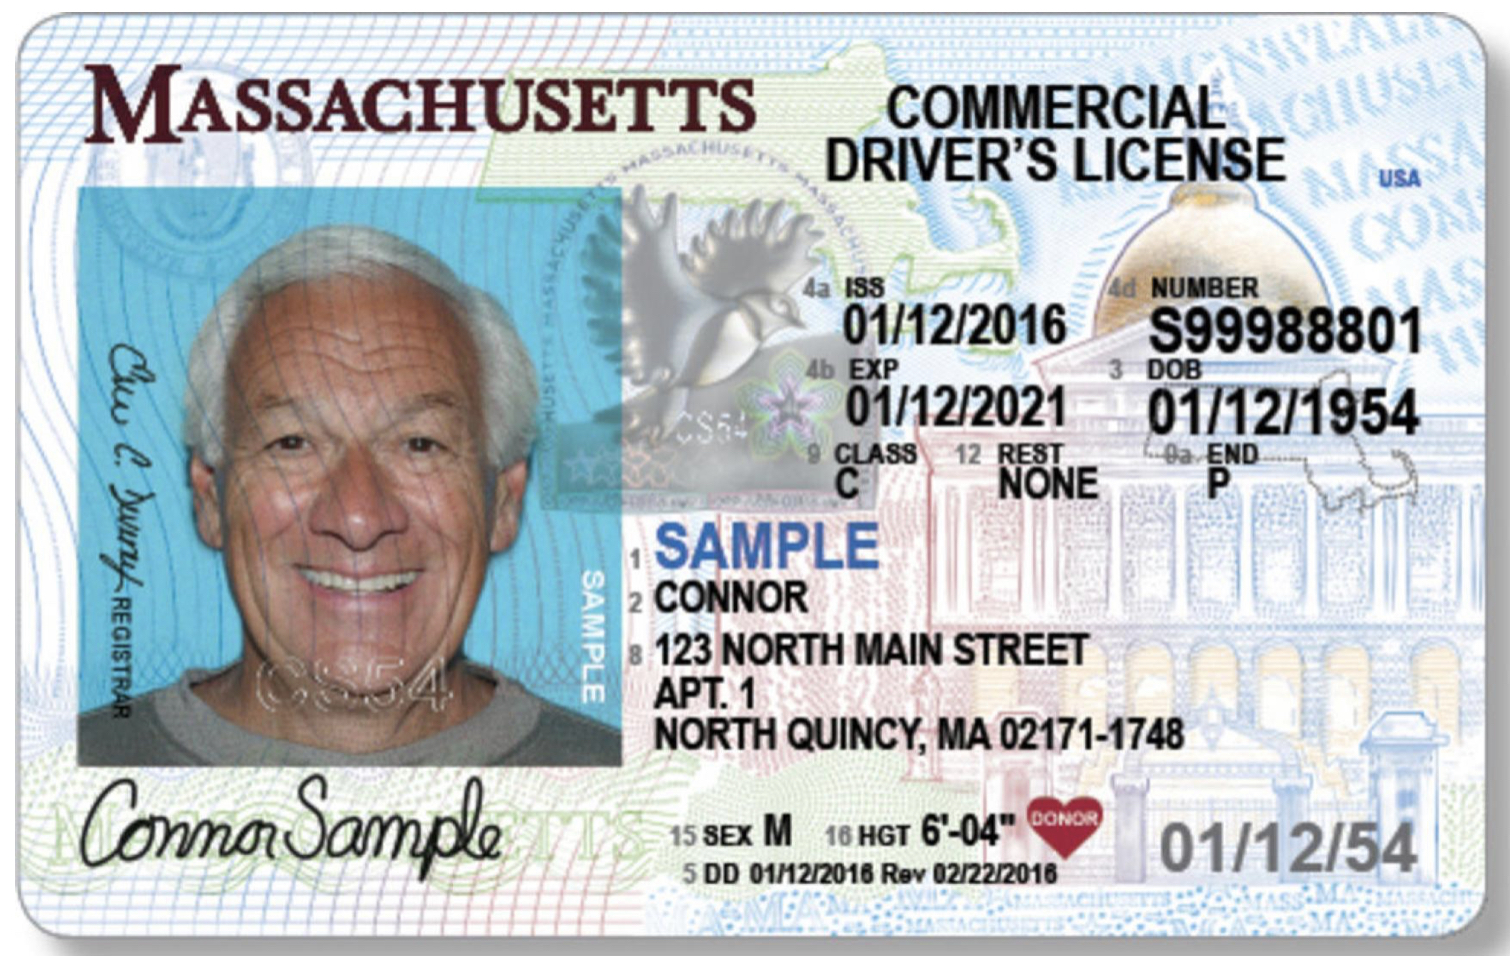 Driver License Bill becomes law in Massachusetts 